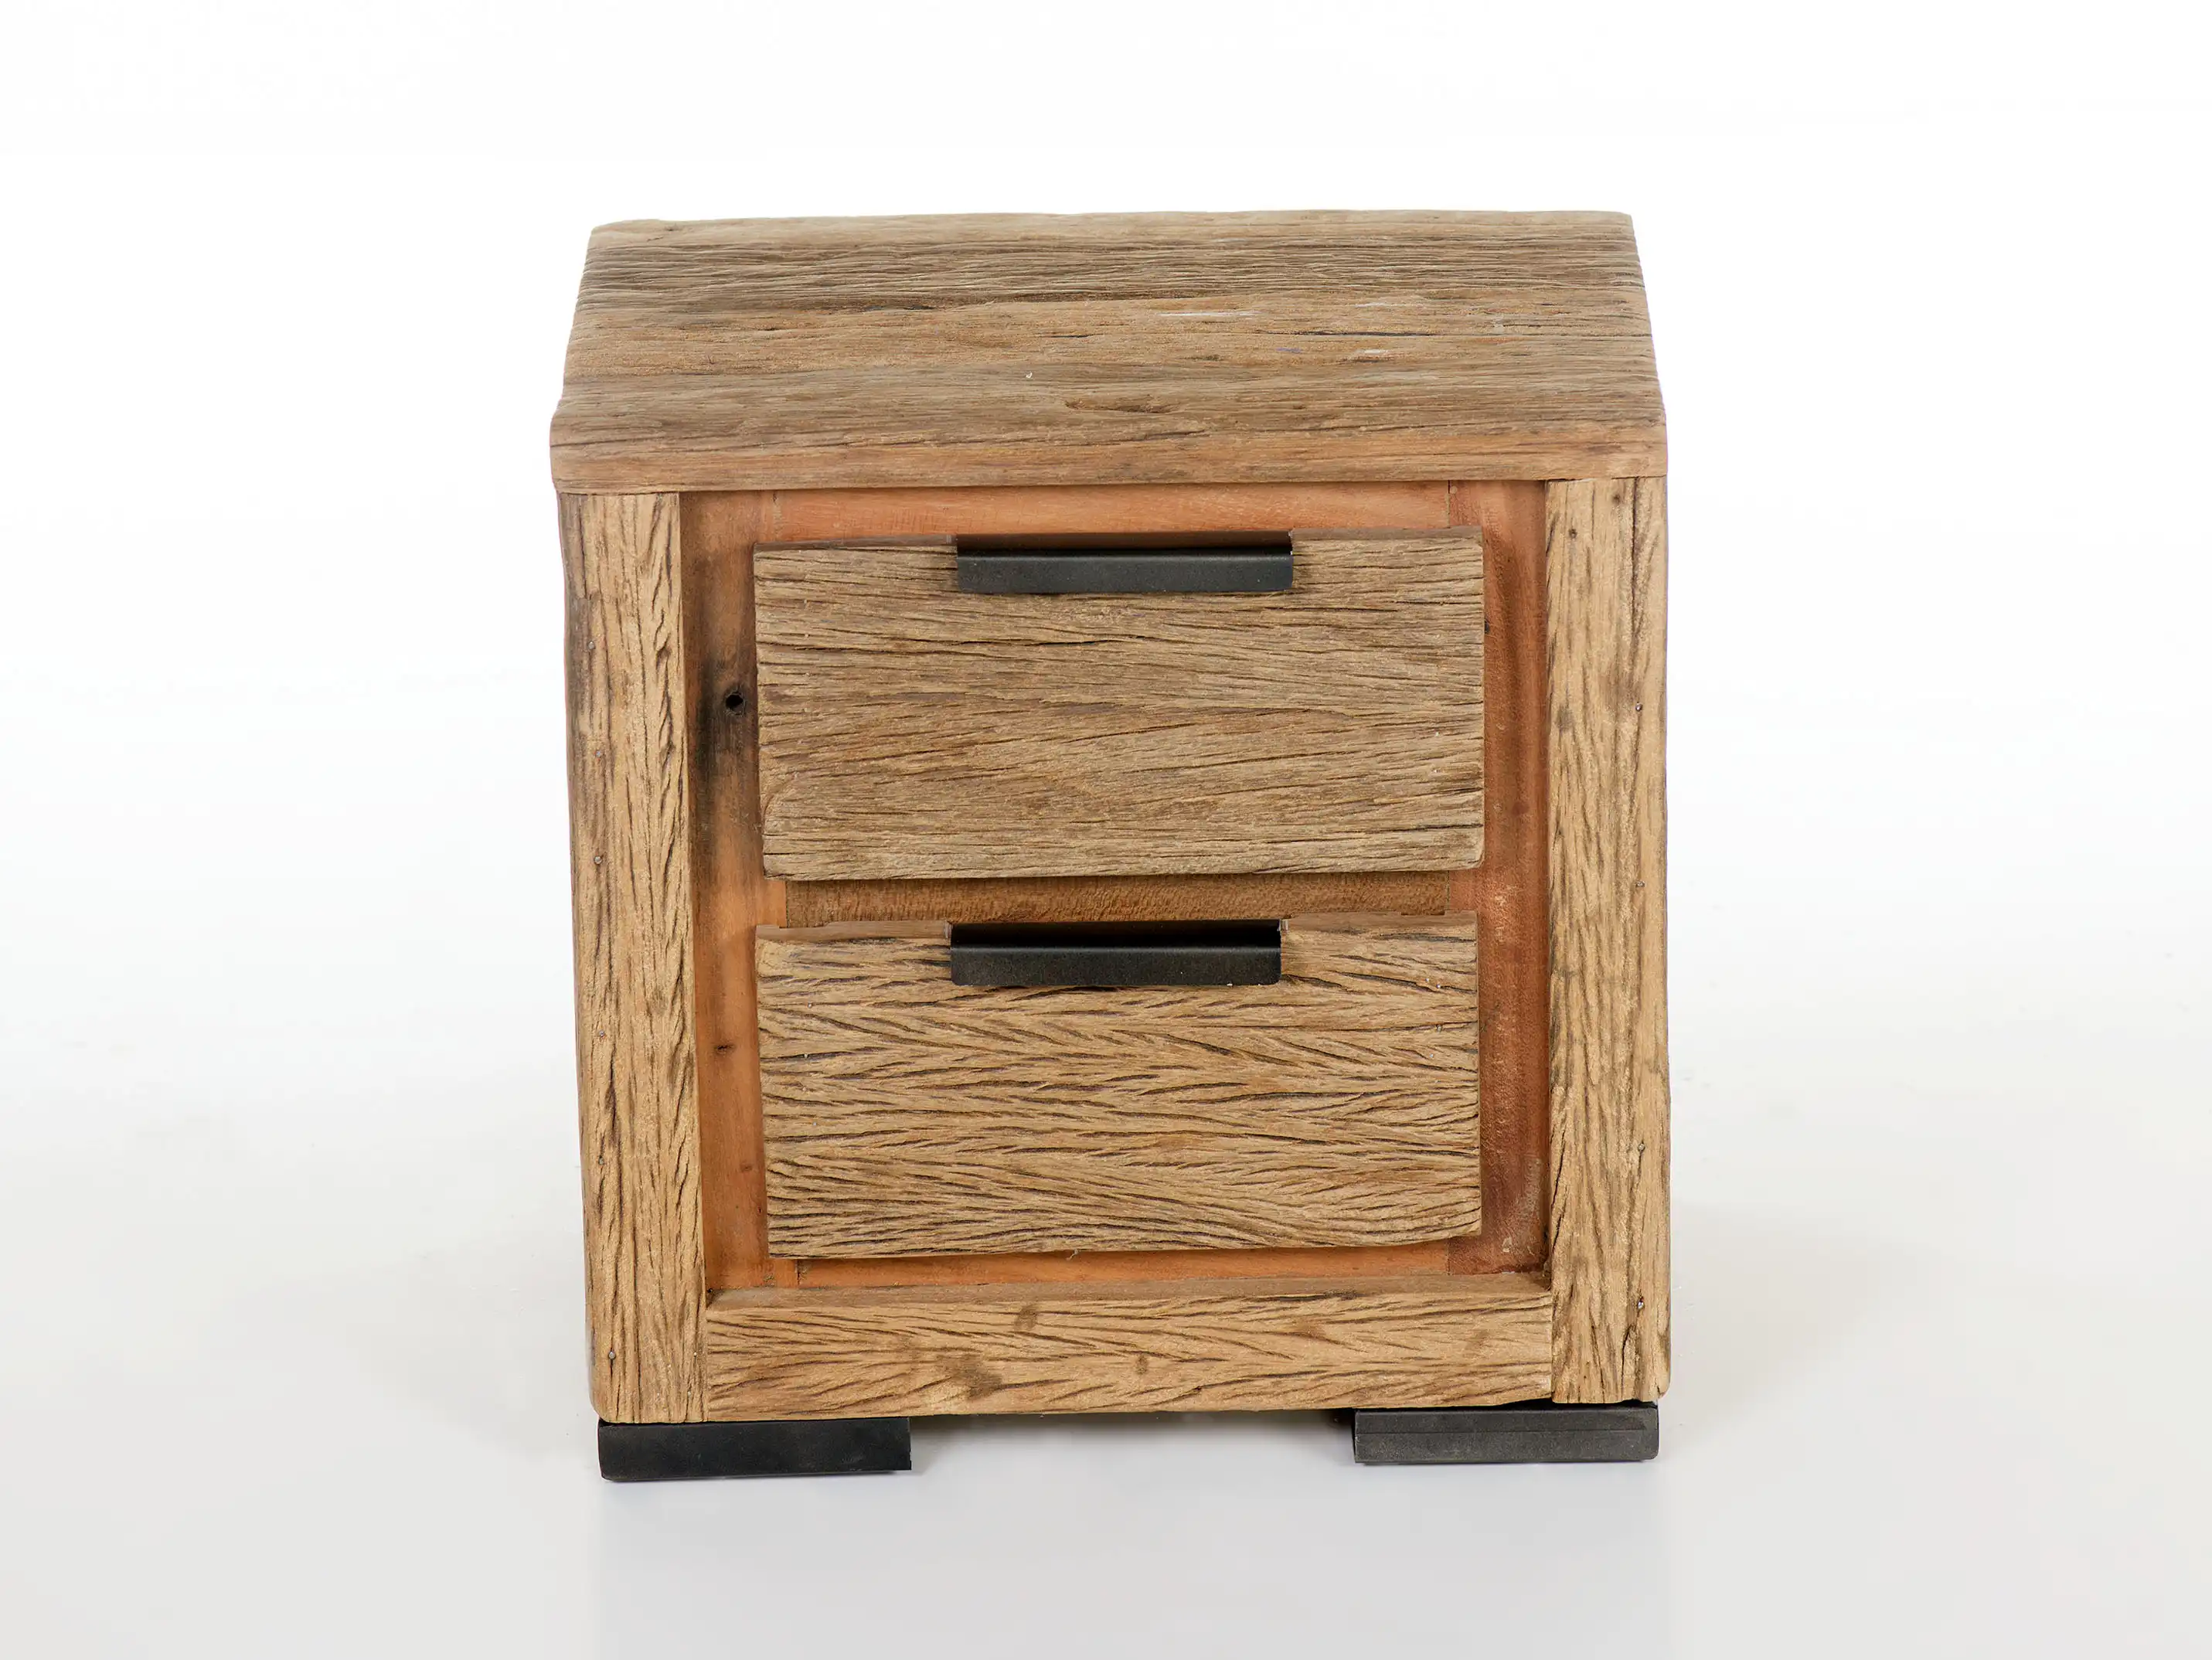 Drift Wood Side Table with 2 Drawers - popular handicrafts